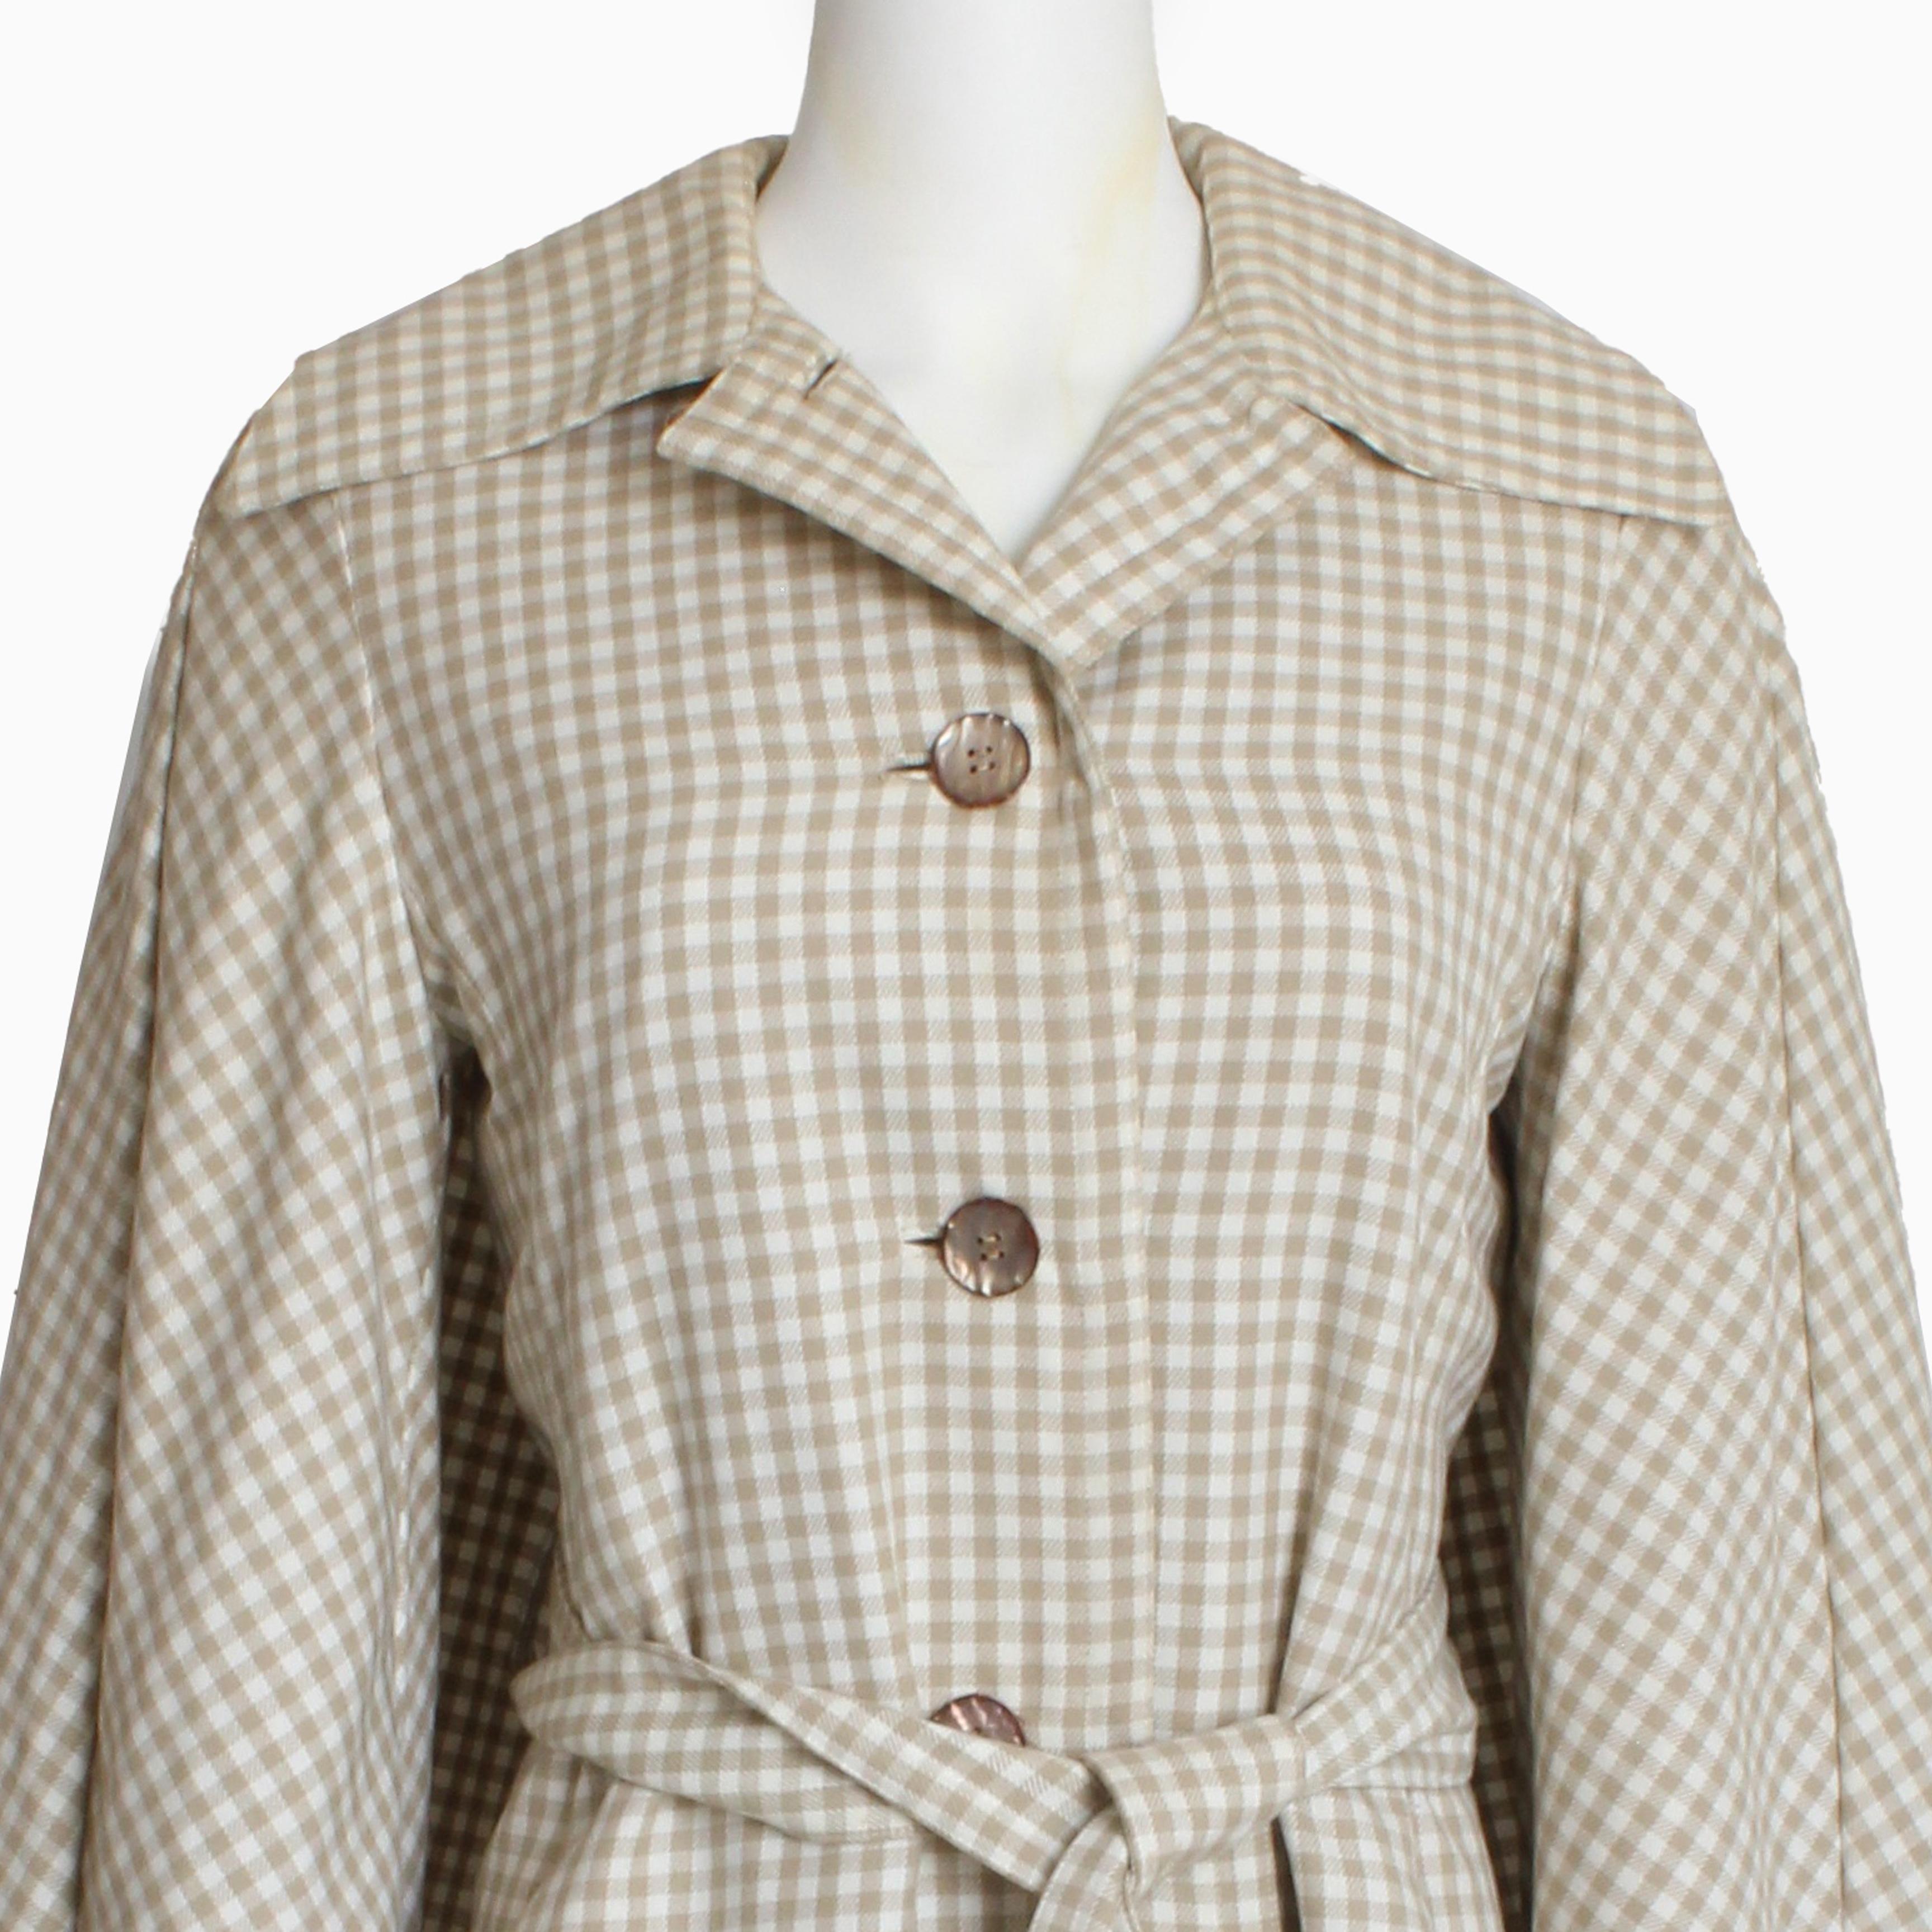 Donald Brooks Jacket with Caplet Trench Style Tan White Check Pattern Vintage  In Good Condition For Sale In Port Saint Lucie, FL